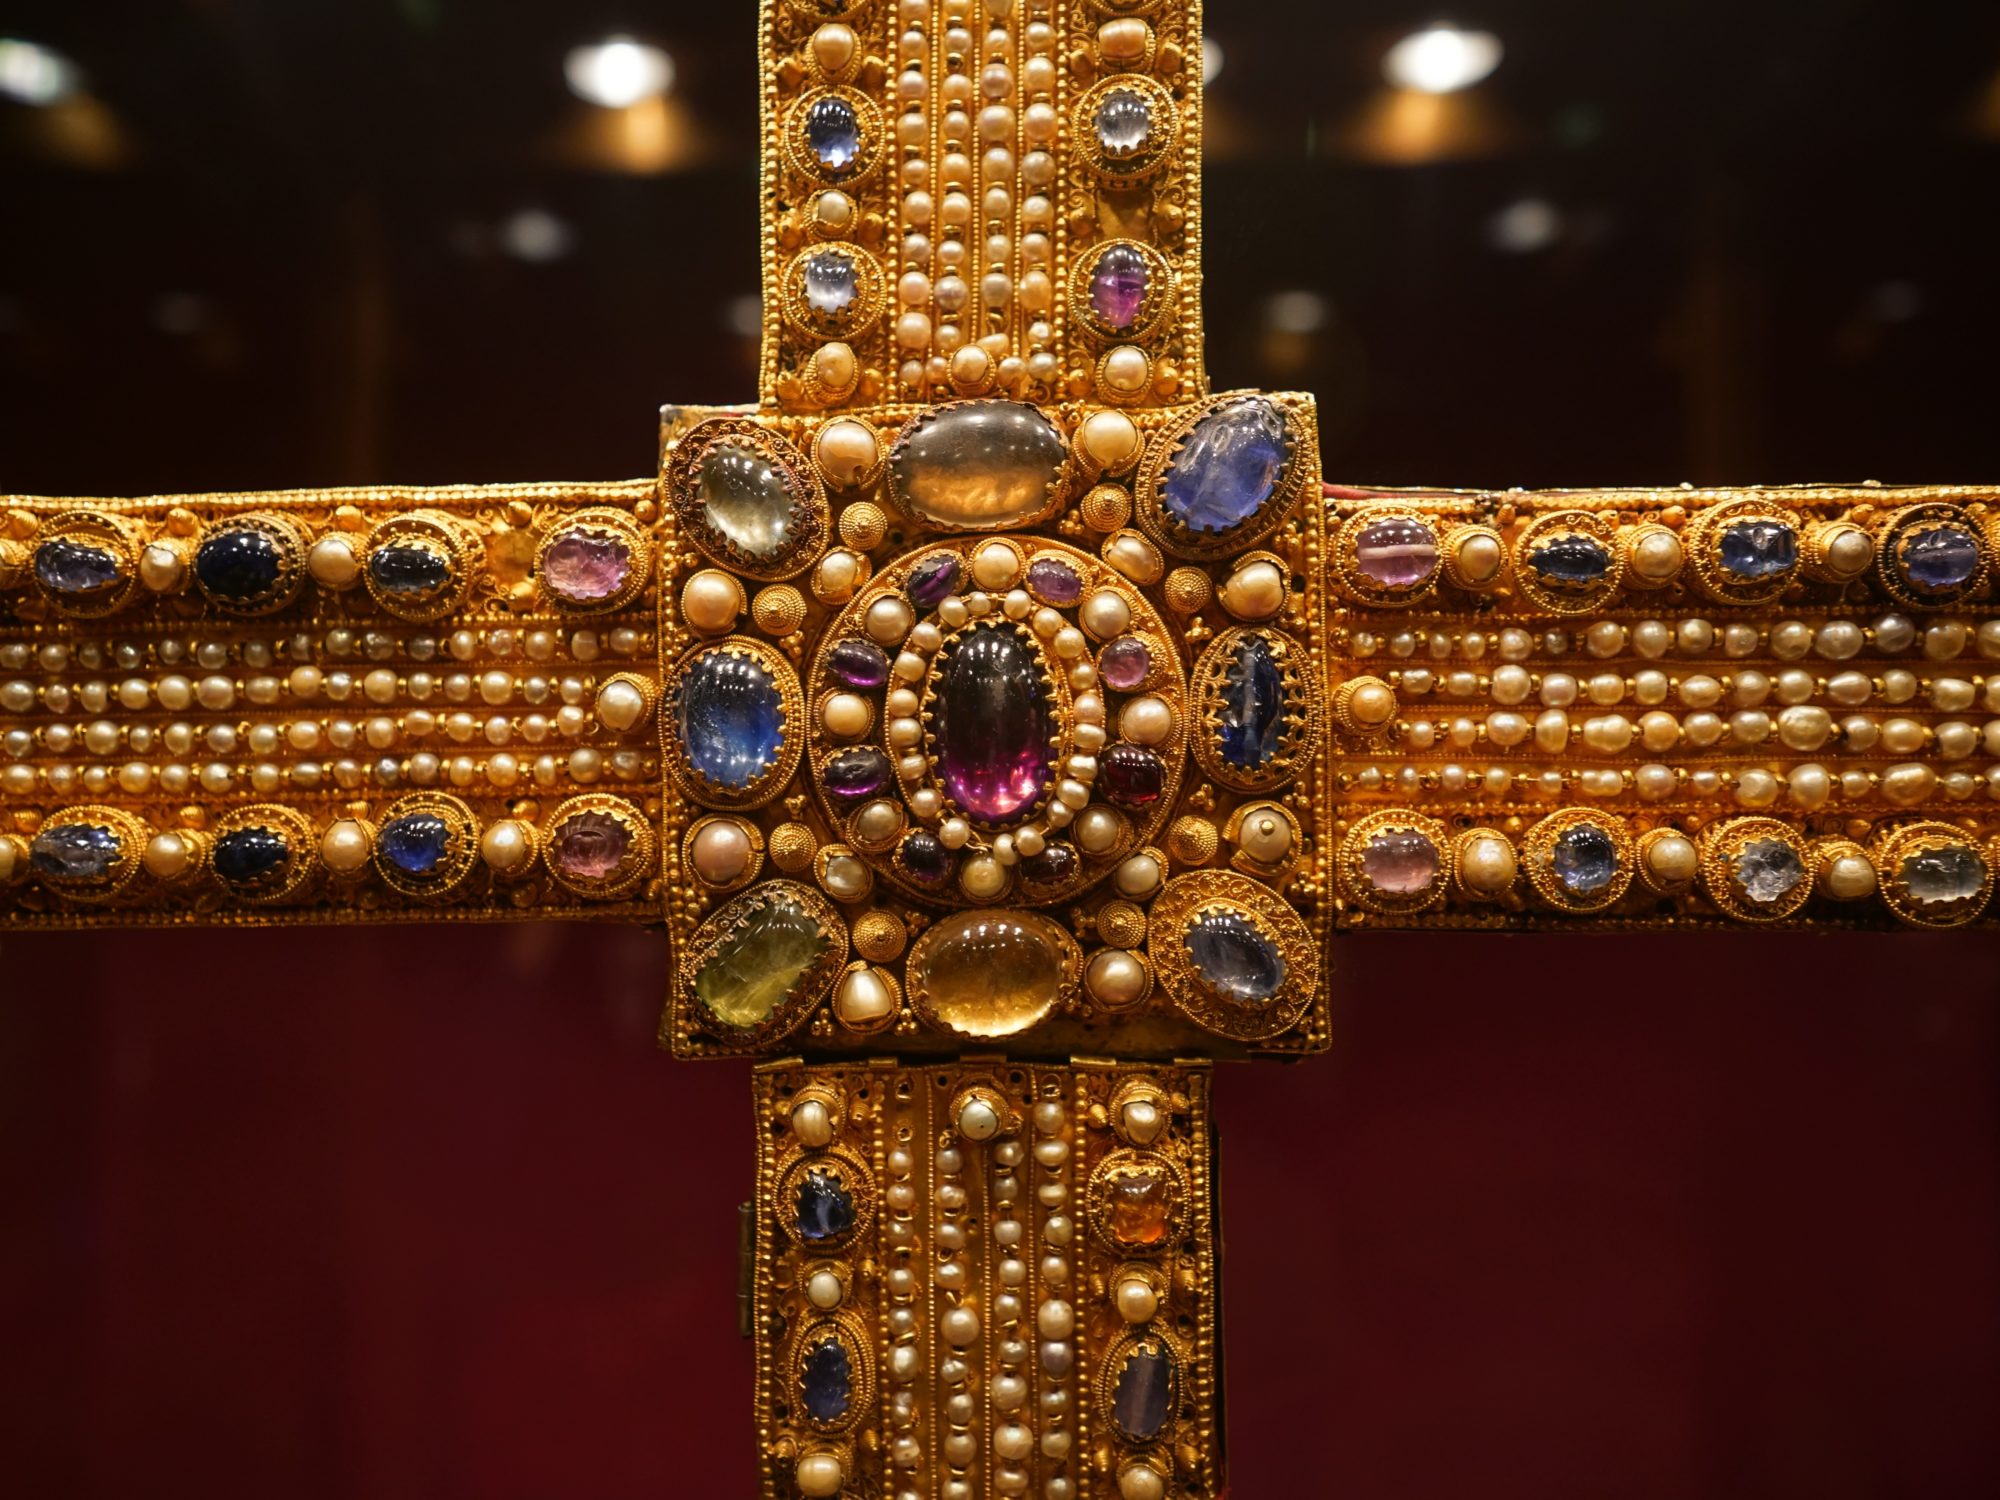 The central part of a cross, covered, in gold and jewels